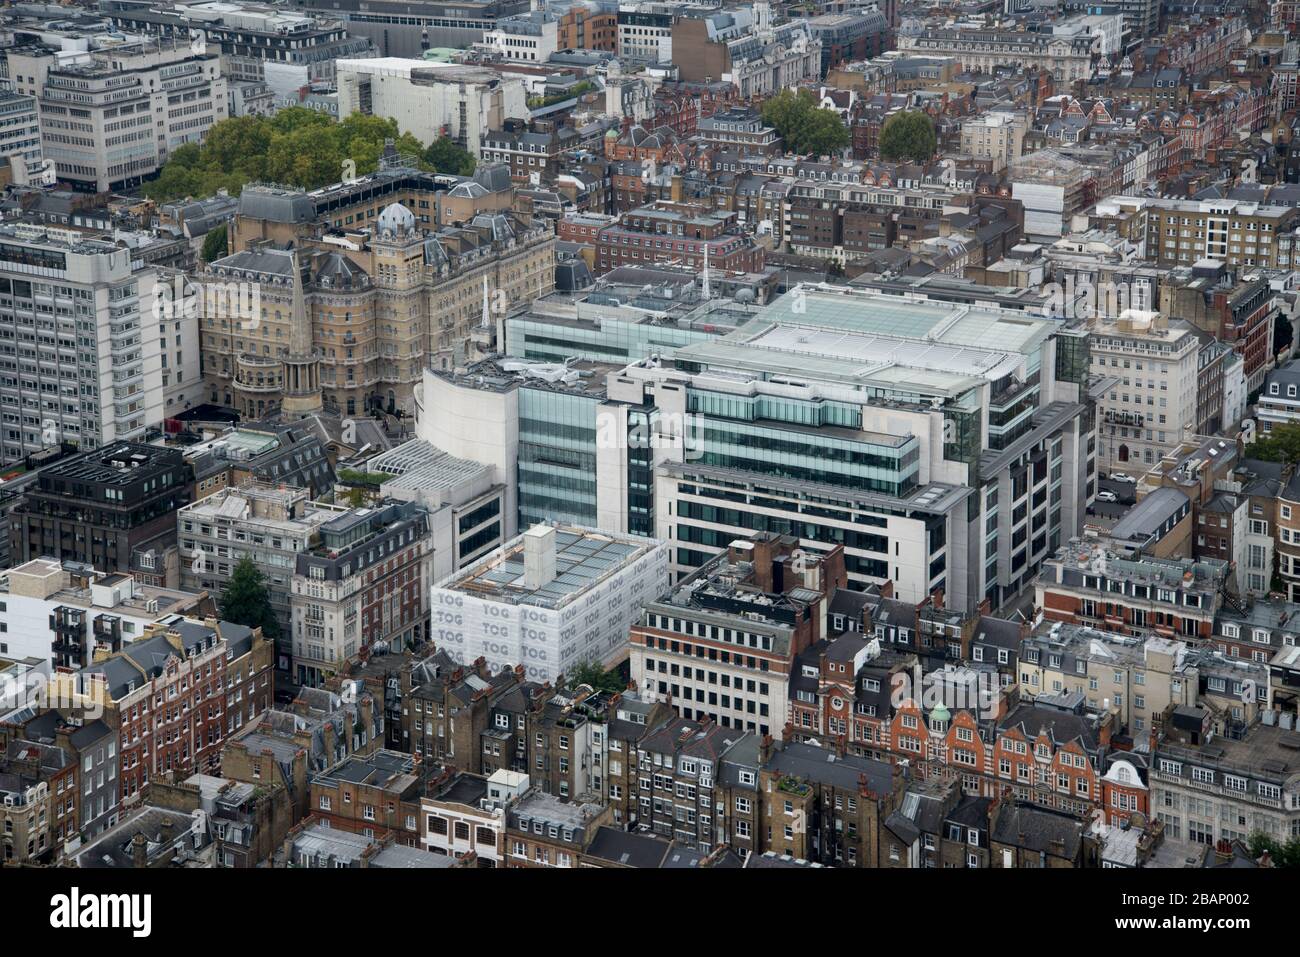 Luftansicht des BBC Broadcasting House Portland Place All Souls Church Langham Hotel vom BT Tower, 60 Cleveland St, Fitzrovia, London W1T 4JZ Stockfoto